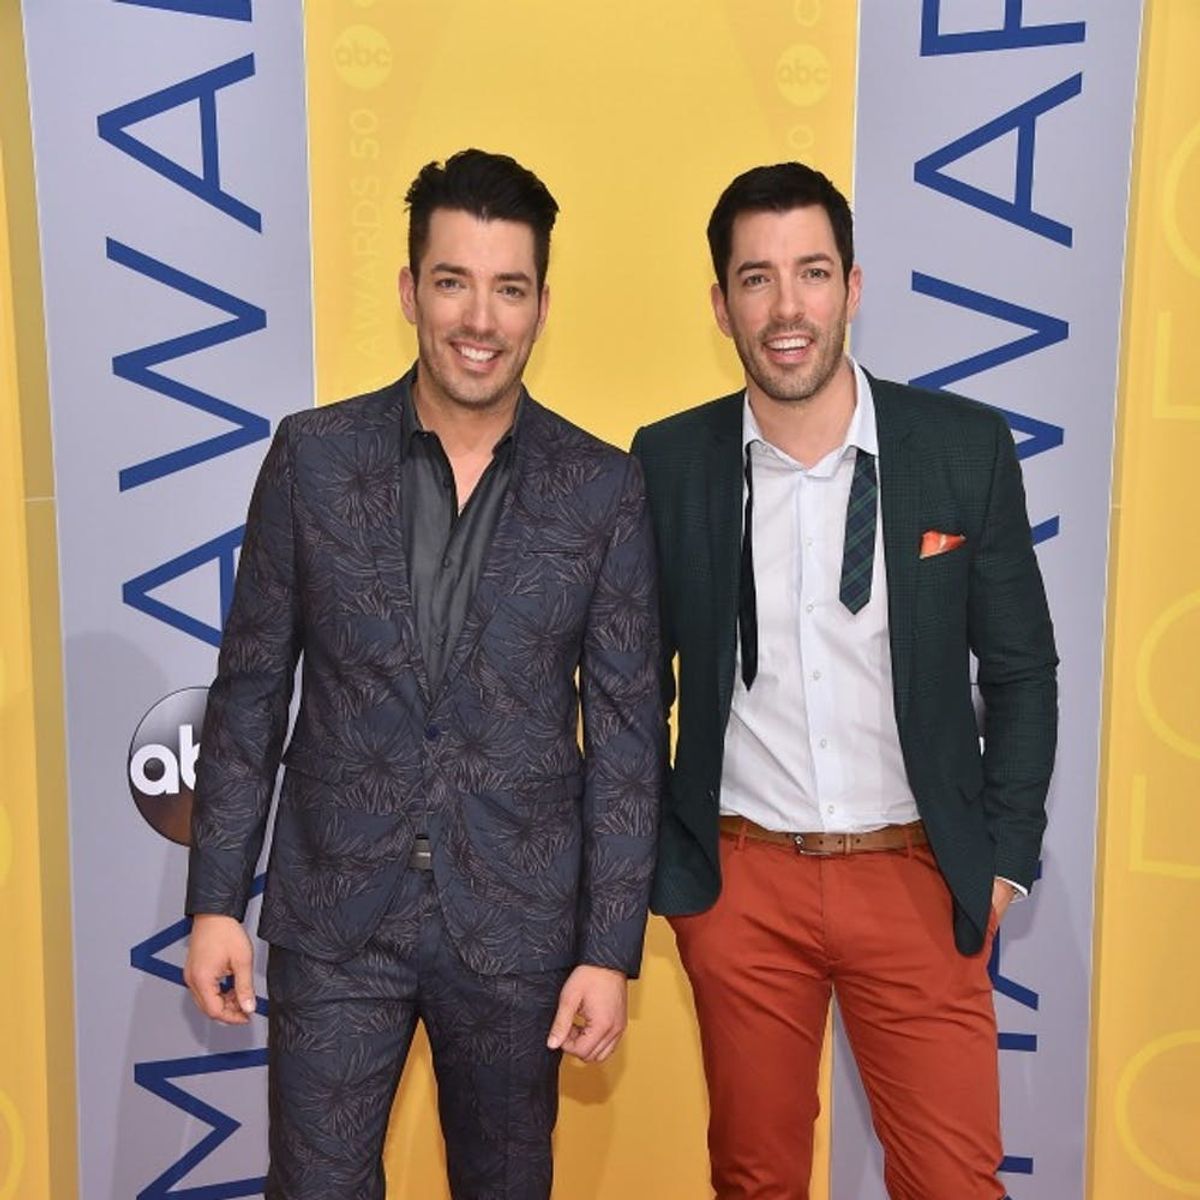 Ever Wonder How Real HGTV Shows Are? The Property Brothers Are Spilling Their Secrets